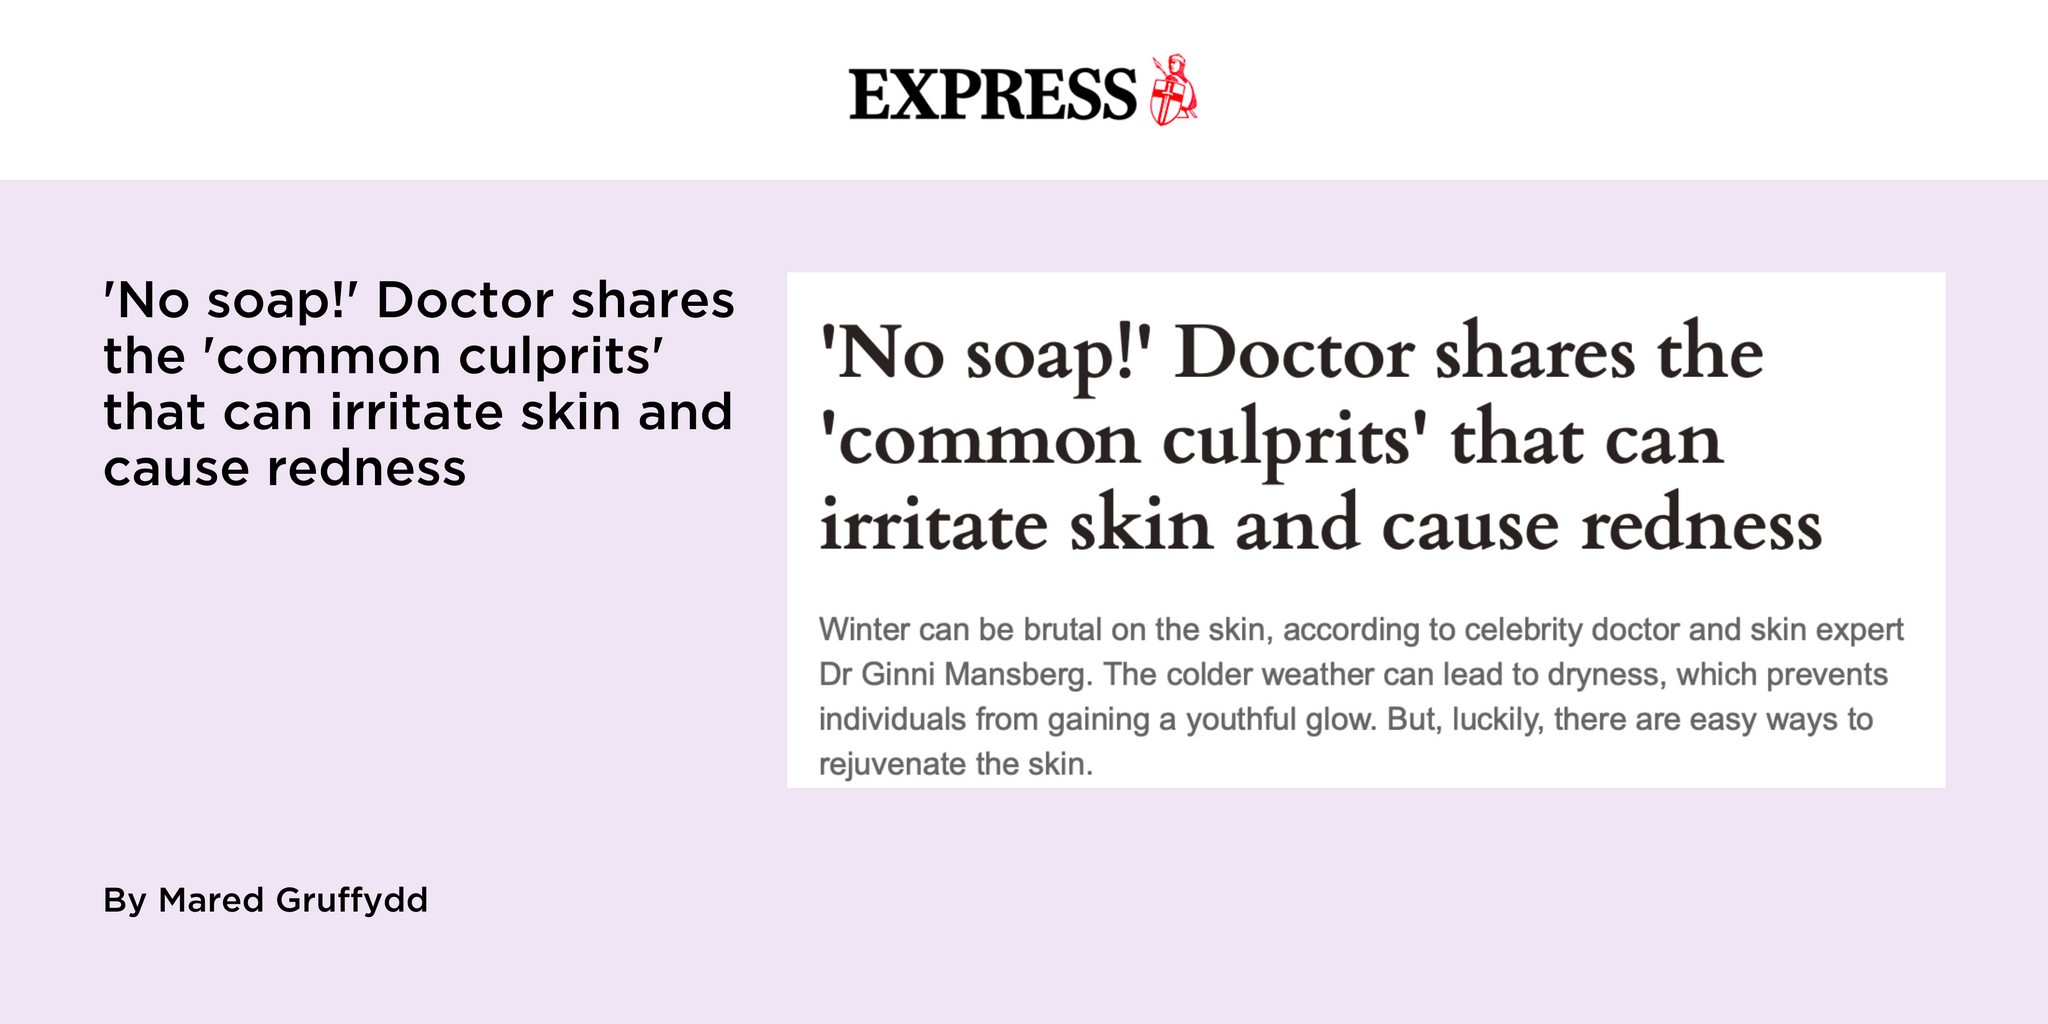 'No soap!' Doctor shares the 'common culprits' that can irritate skin and cause redness